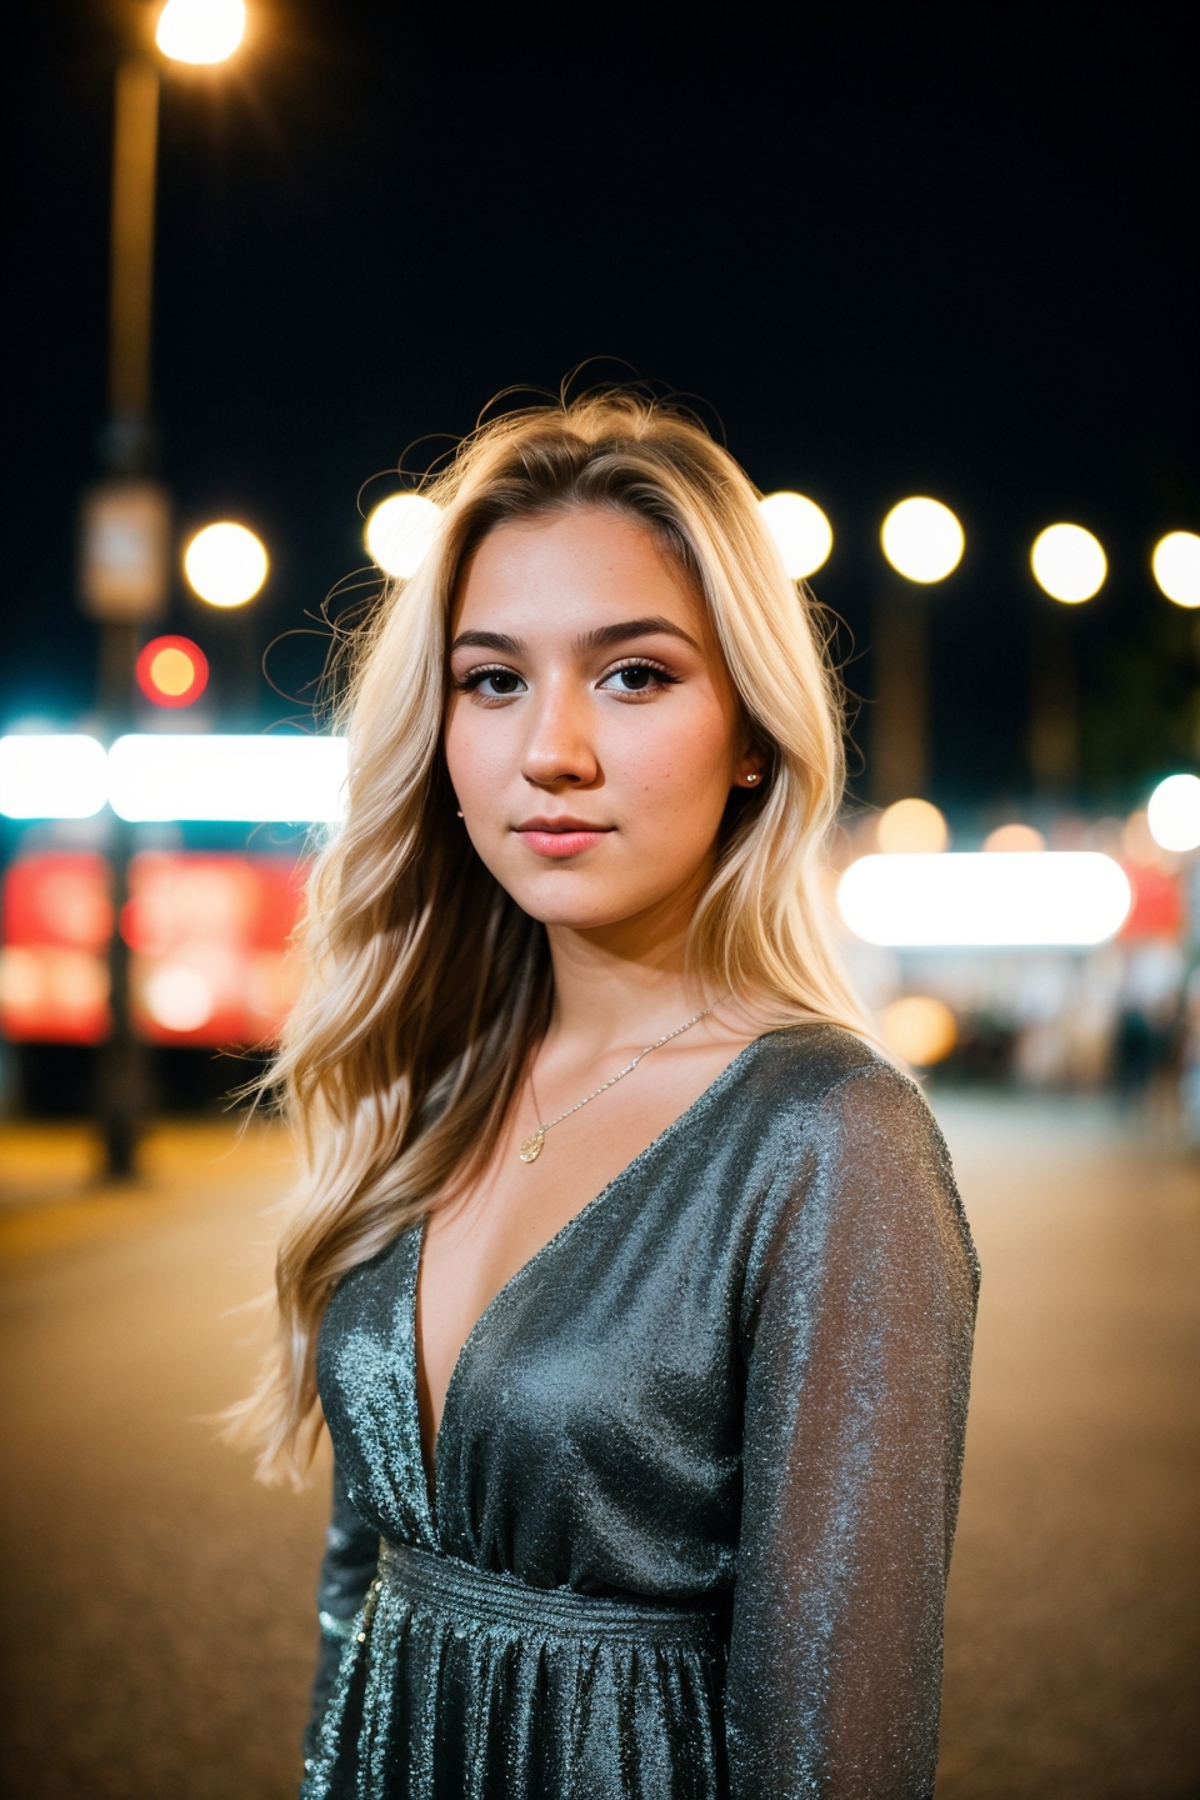 Blond Woman in a Low-Cut Dress at Night